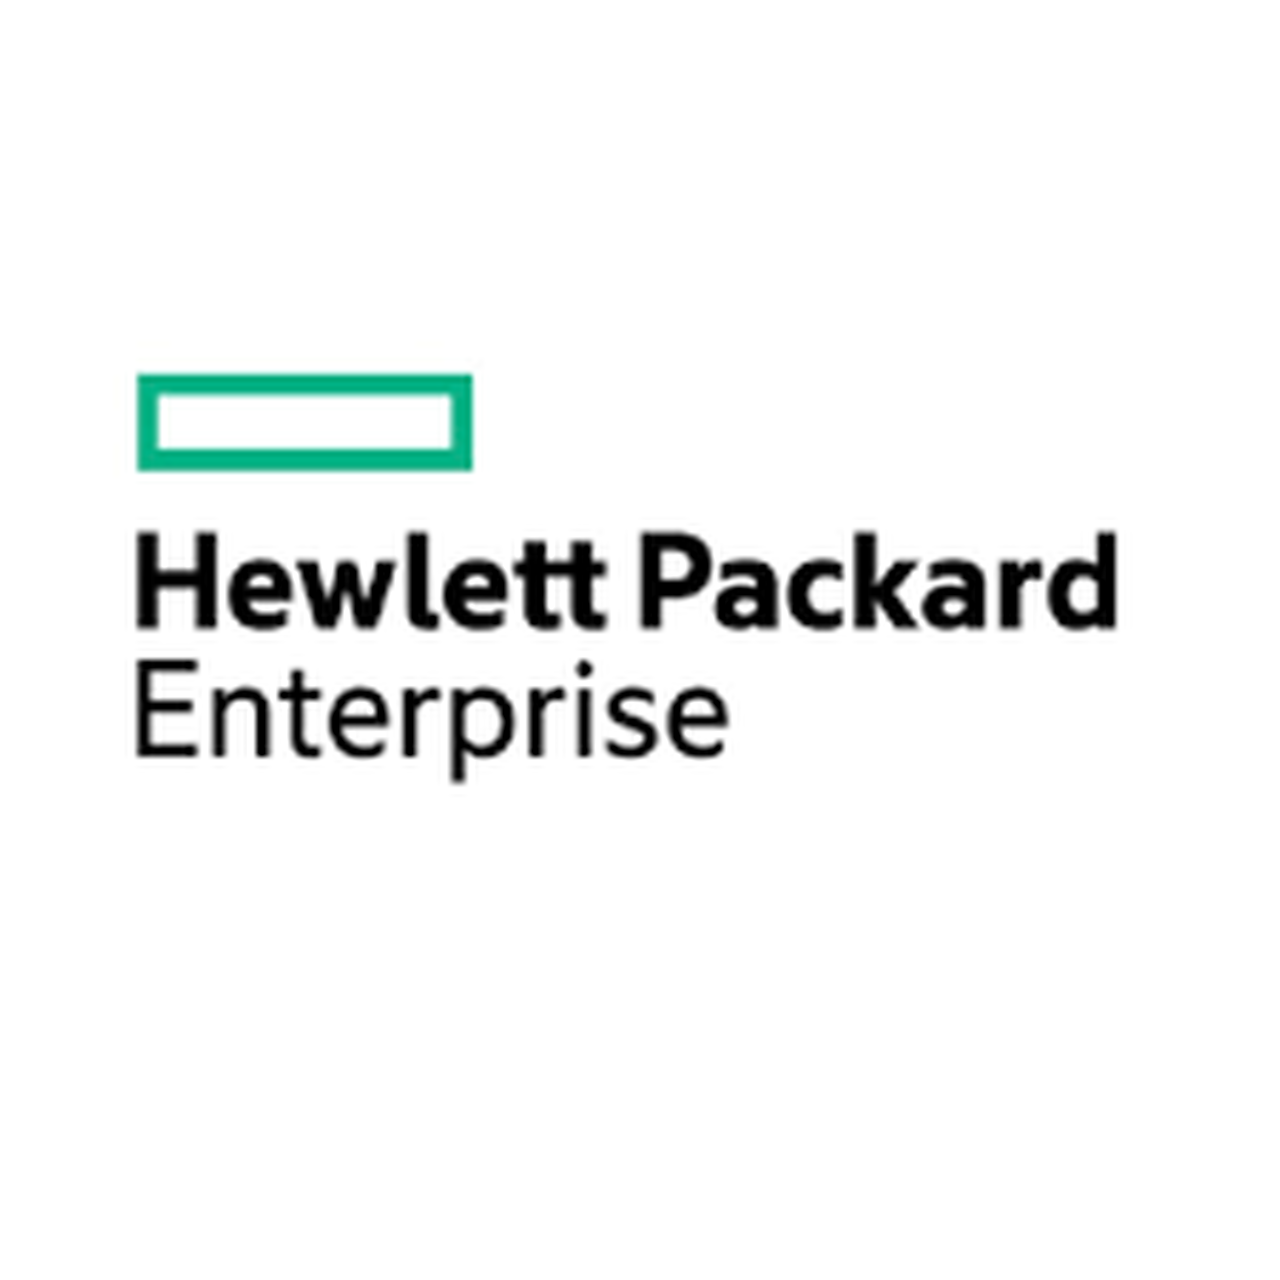 HPE Smrt Hbrd Capactr w/ 145mm Reman Cable Factory integrated (Sourcing) - HPE Discontinued Product)